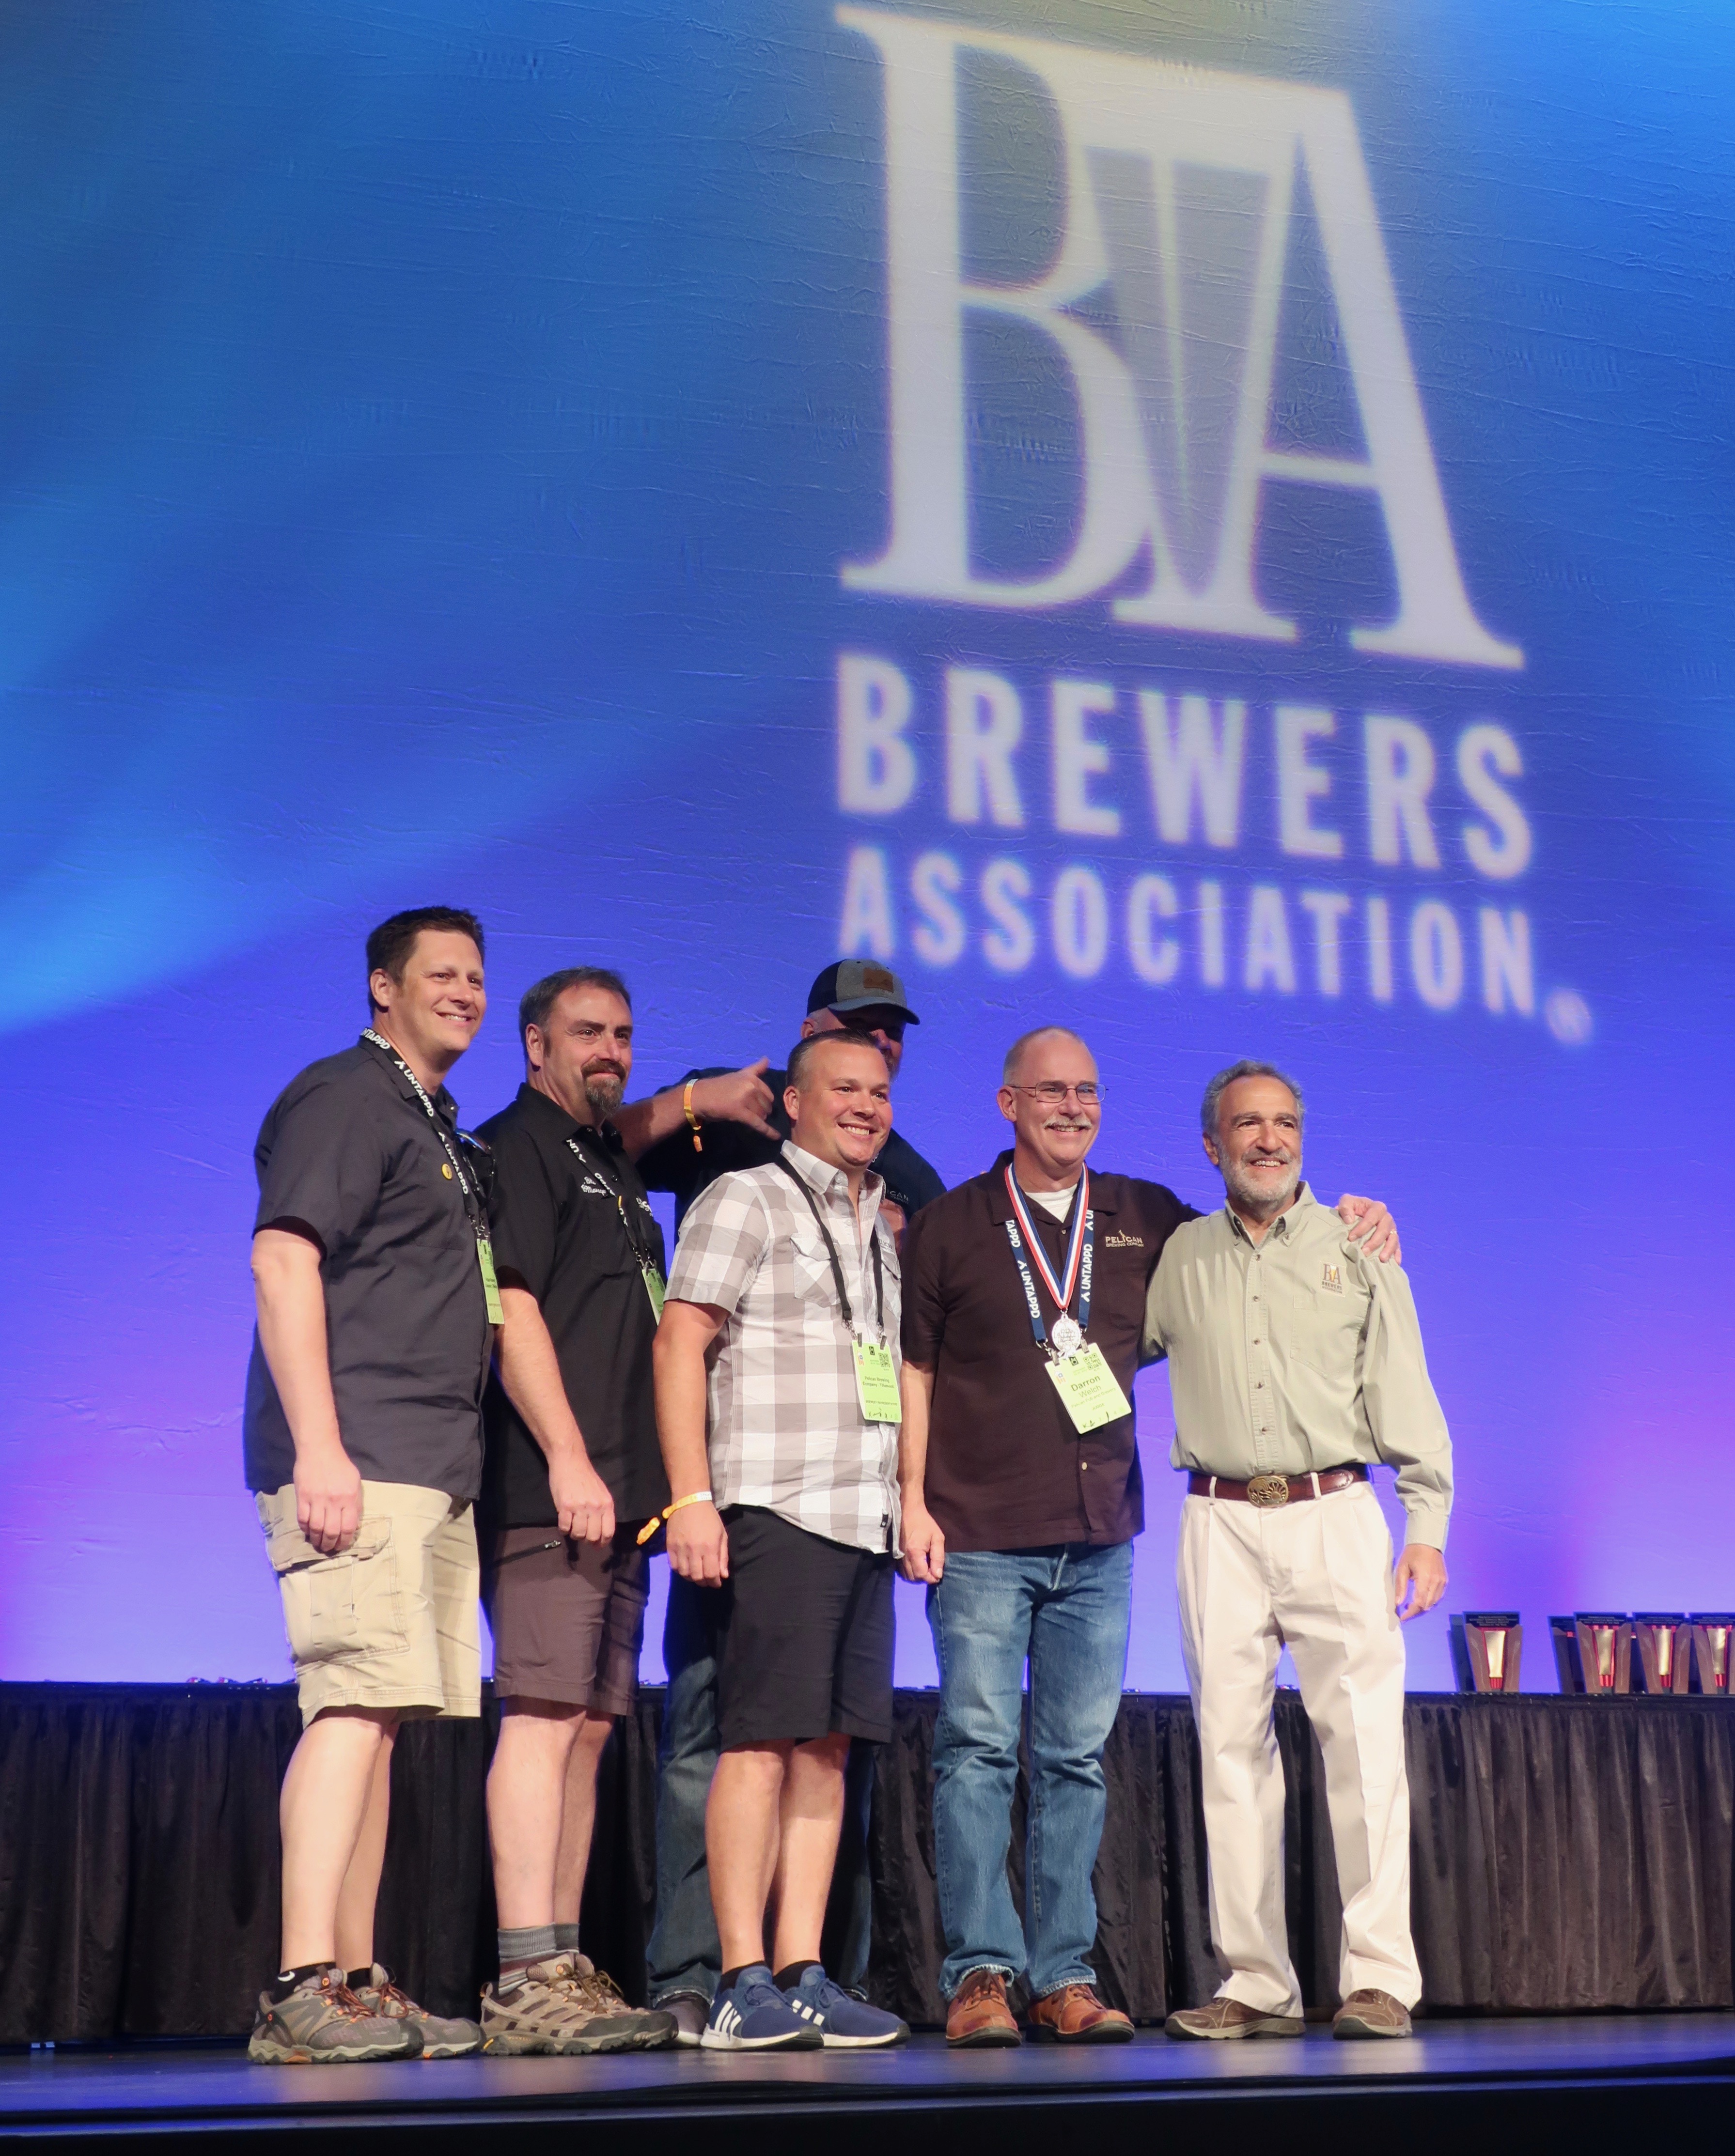 Pelican Brewing on stage accepting its medal at the 2018 Great American Beer Festival.